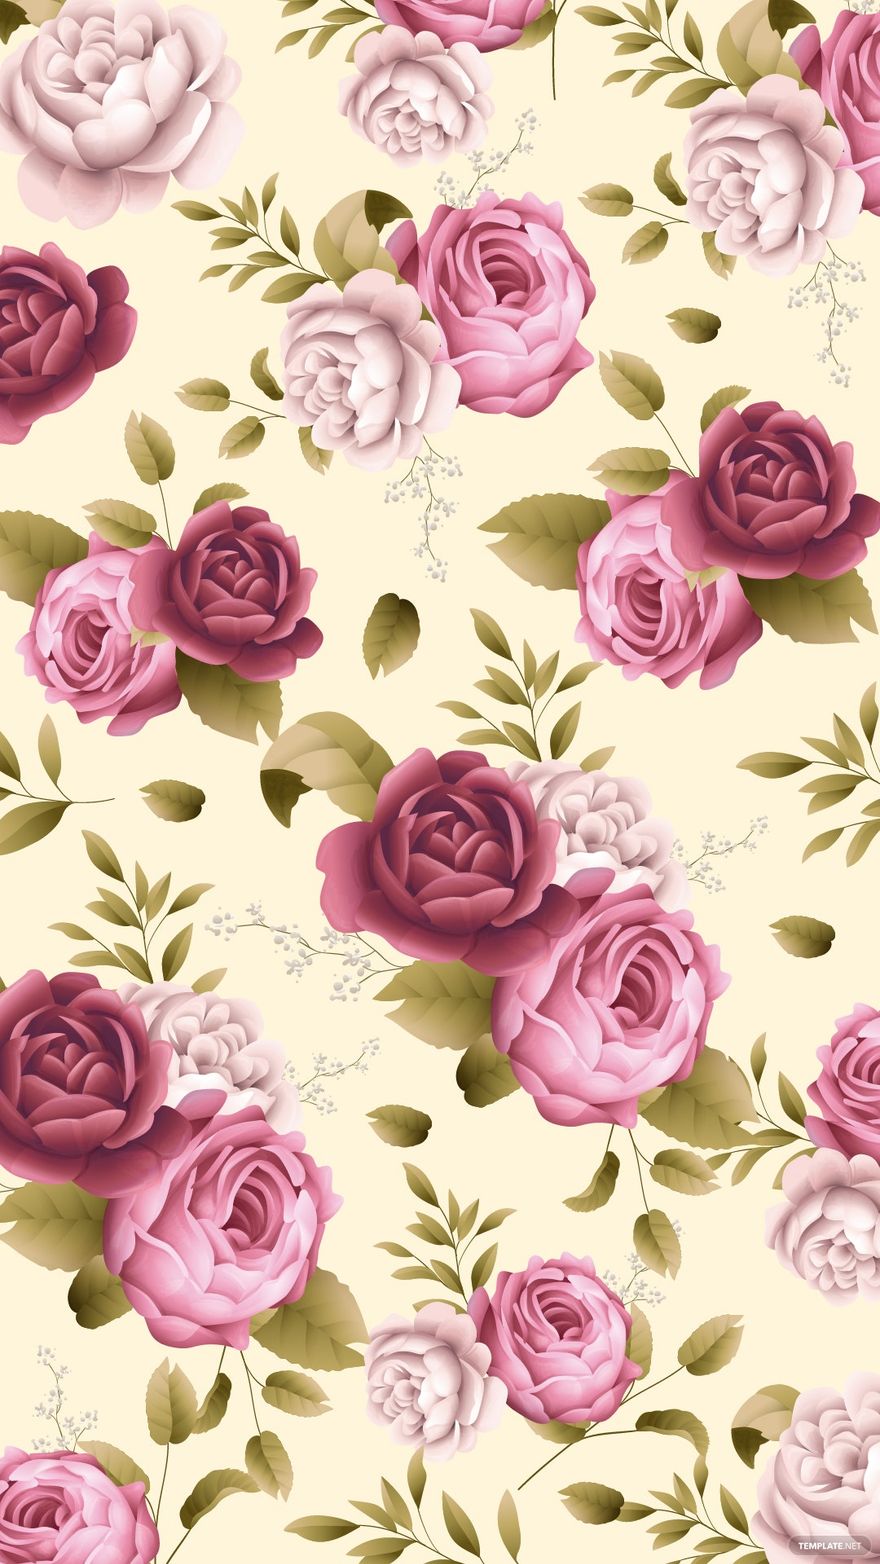 Free Pastel Floral Iphone Background